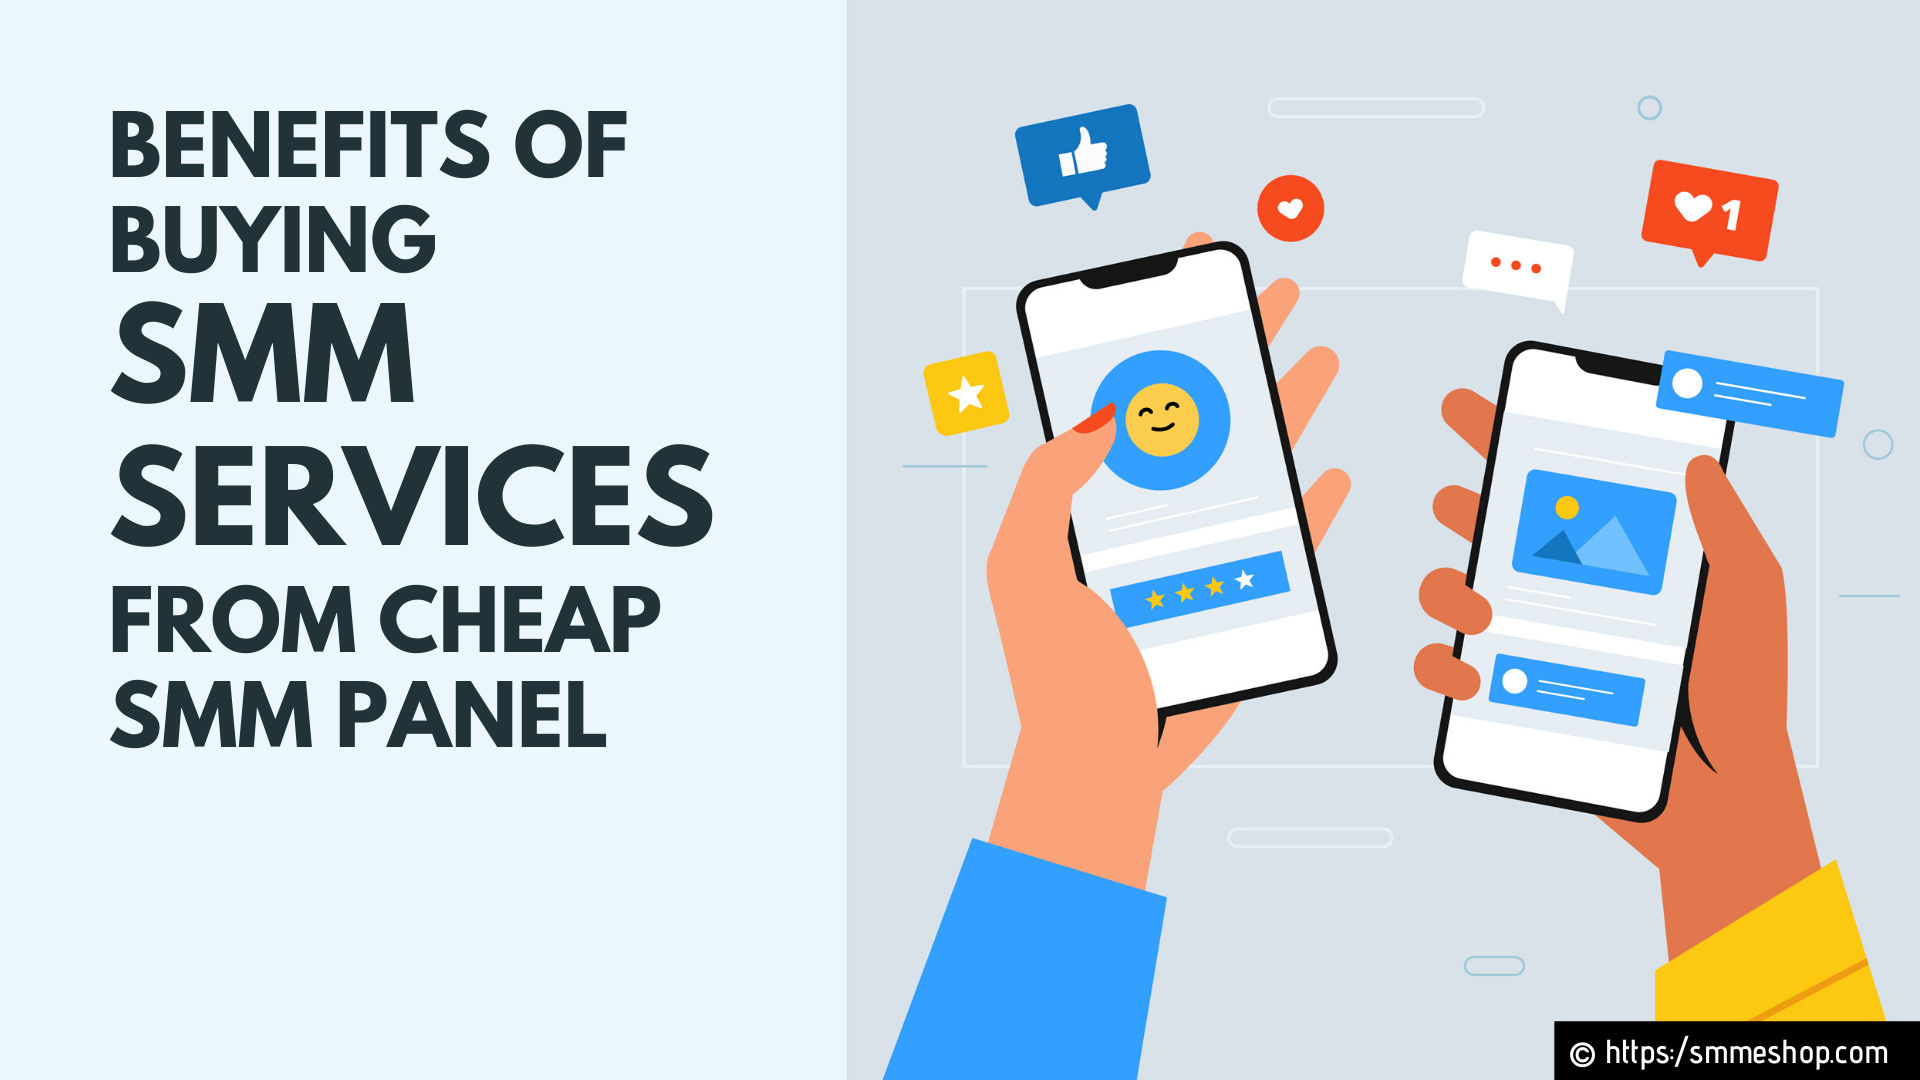 Benefits of Buying SMM Services from Cheap SMM Panel